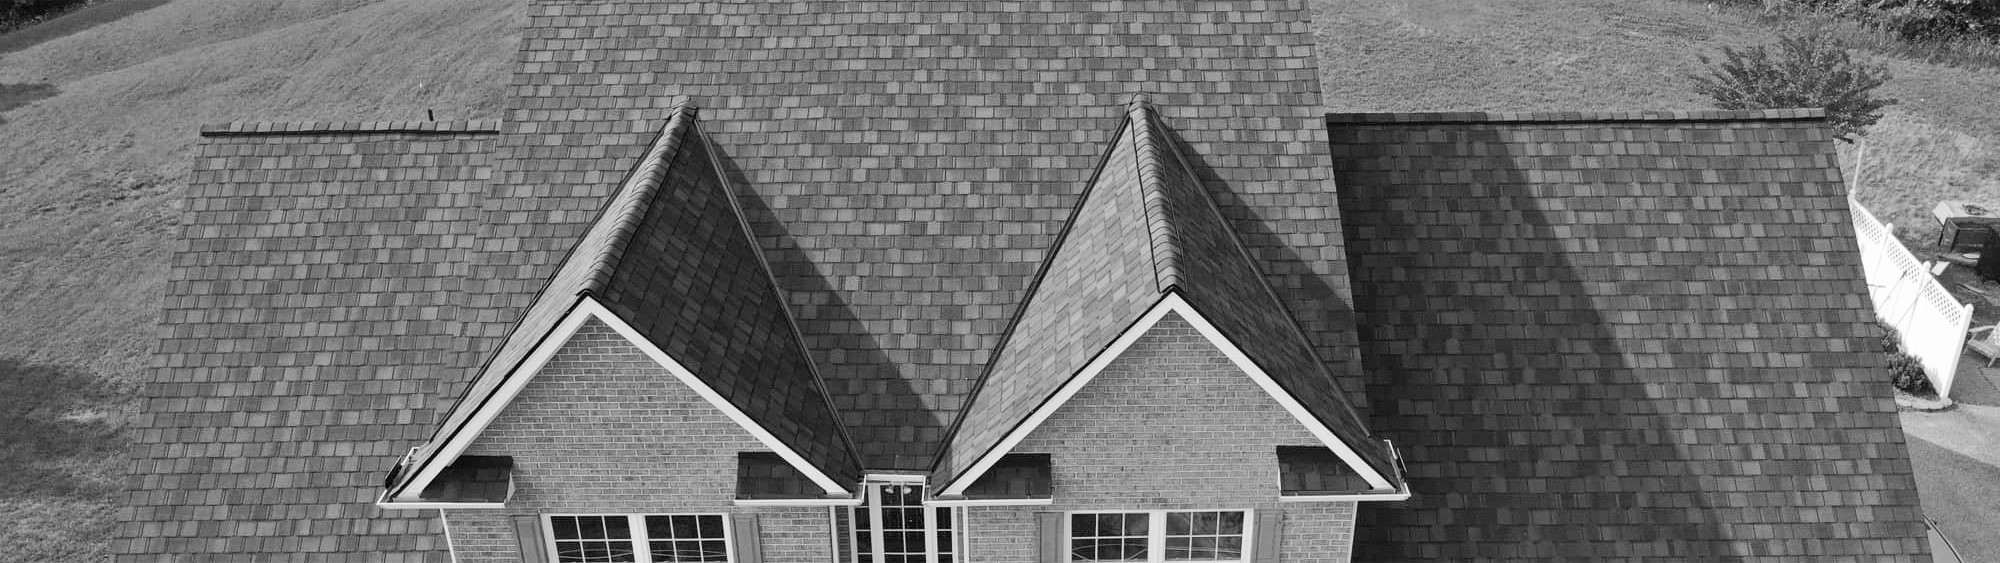 Clearcreek Residential Roofing Company